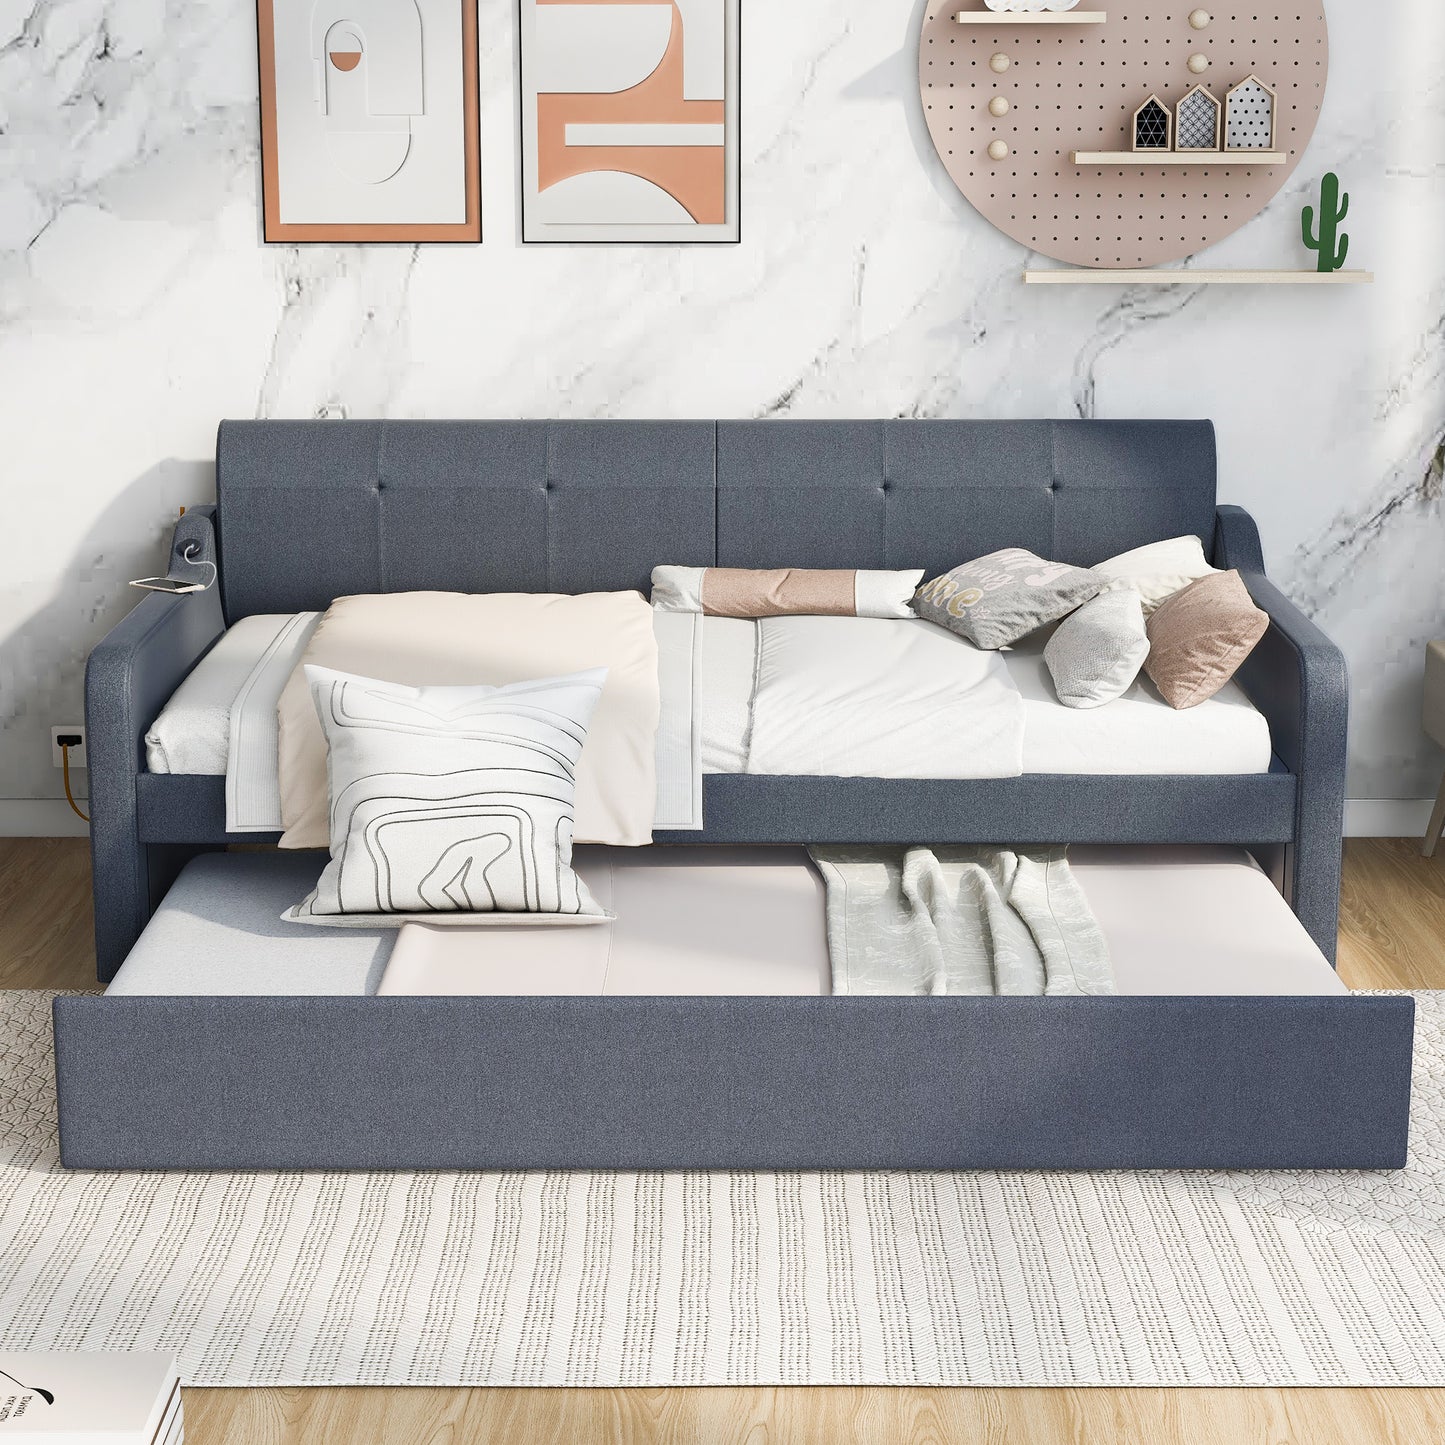 Twin Size Upholstery DayBed with Trundle and USB Charging Design,Trundle can be flat or erected,Gray